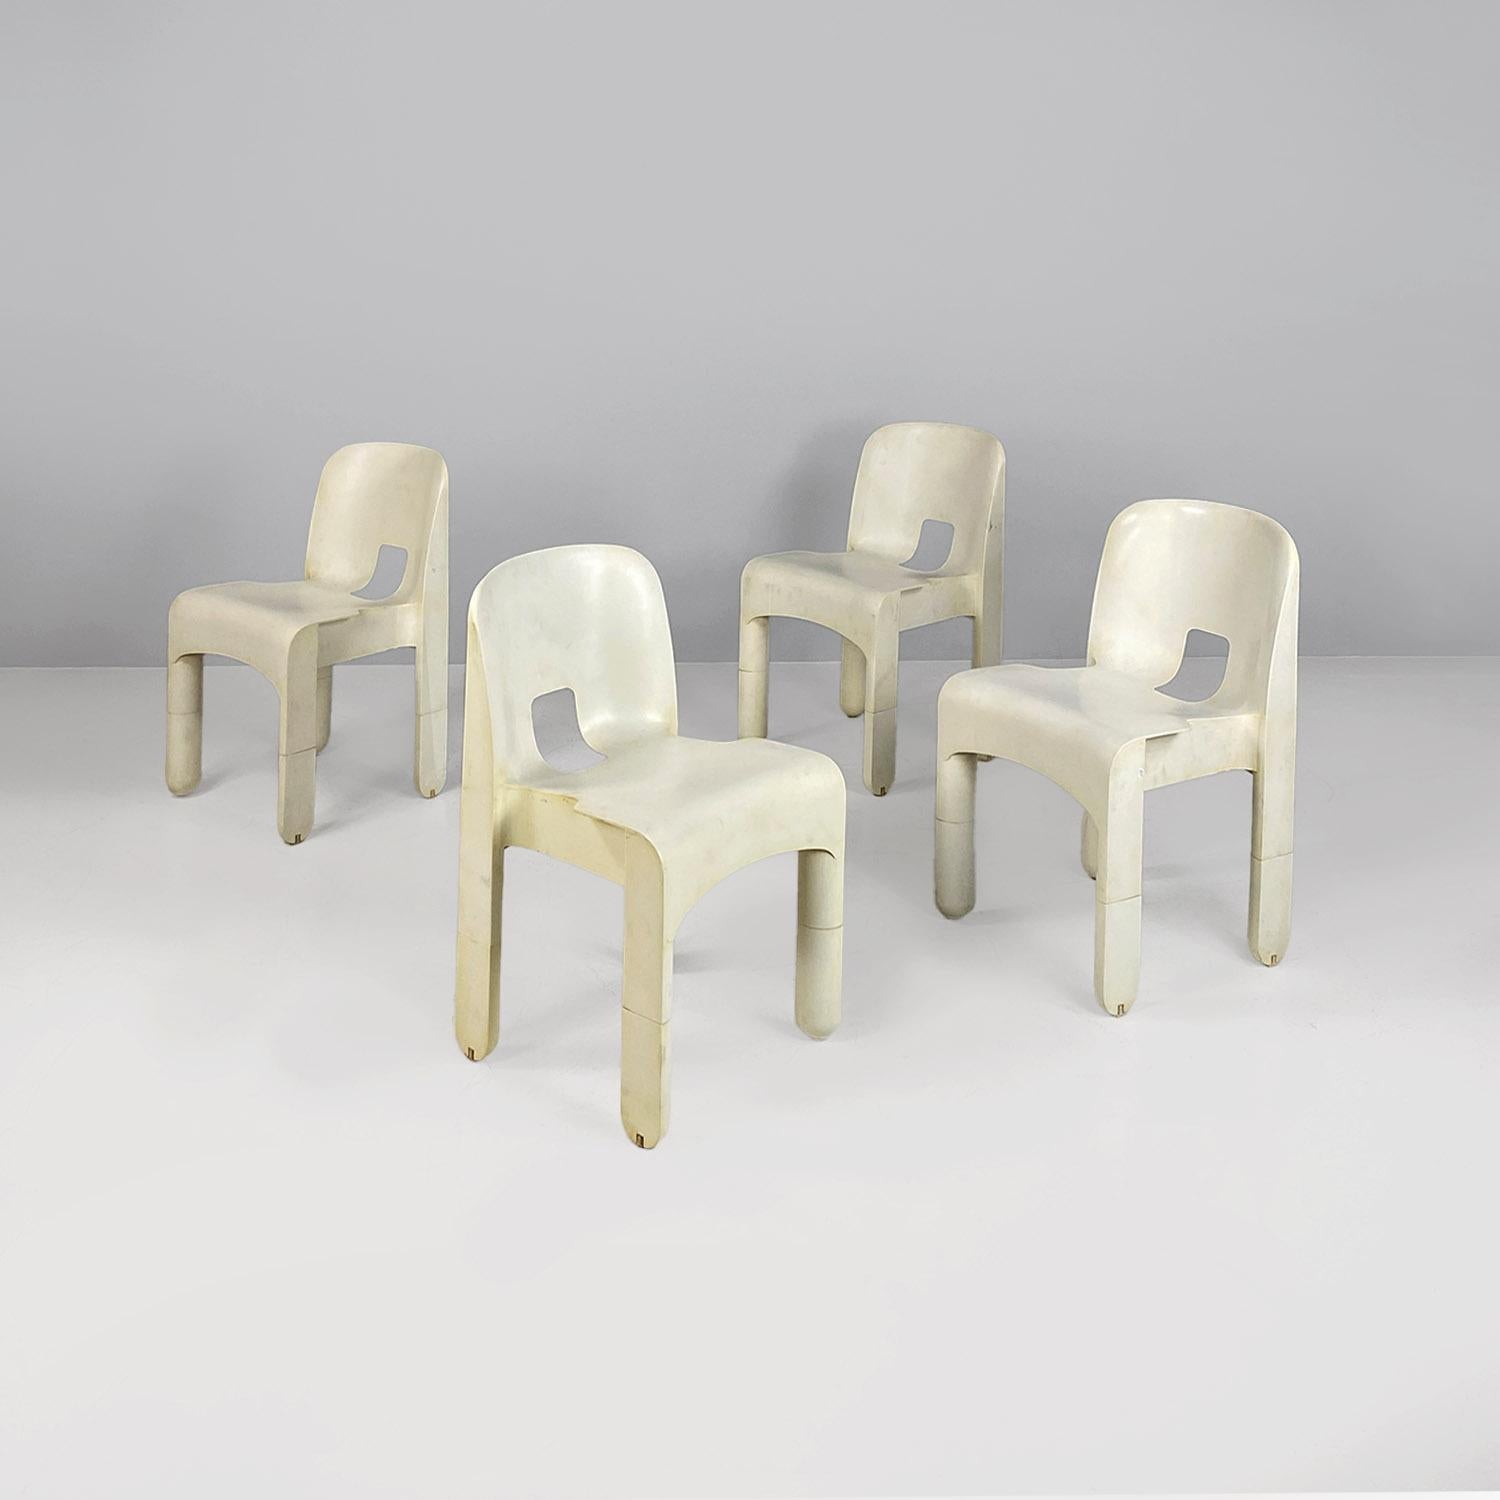 Italian modern white plastic 860 Universale Chairs, Joe Colombo, Kartell, 1970s.
Set consisting of four model 860 chairs, also known as Universale Chair, in cream white ABS plastic. The rectangular seat of the chair has two fins on the outside and